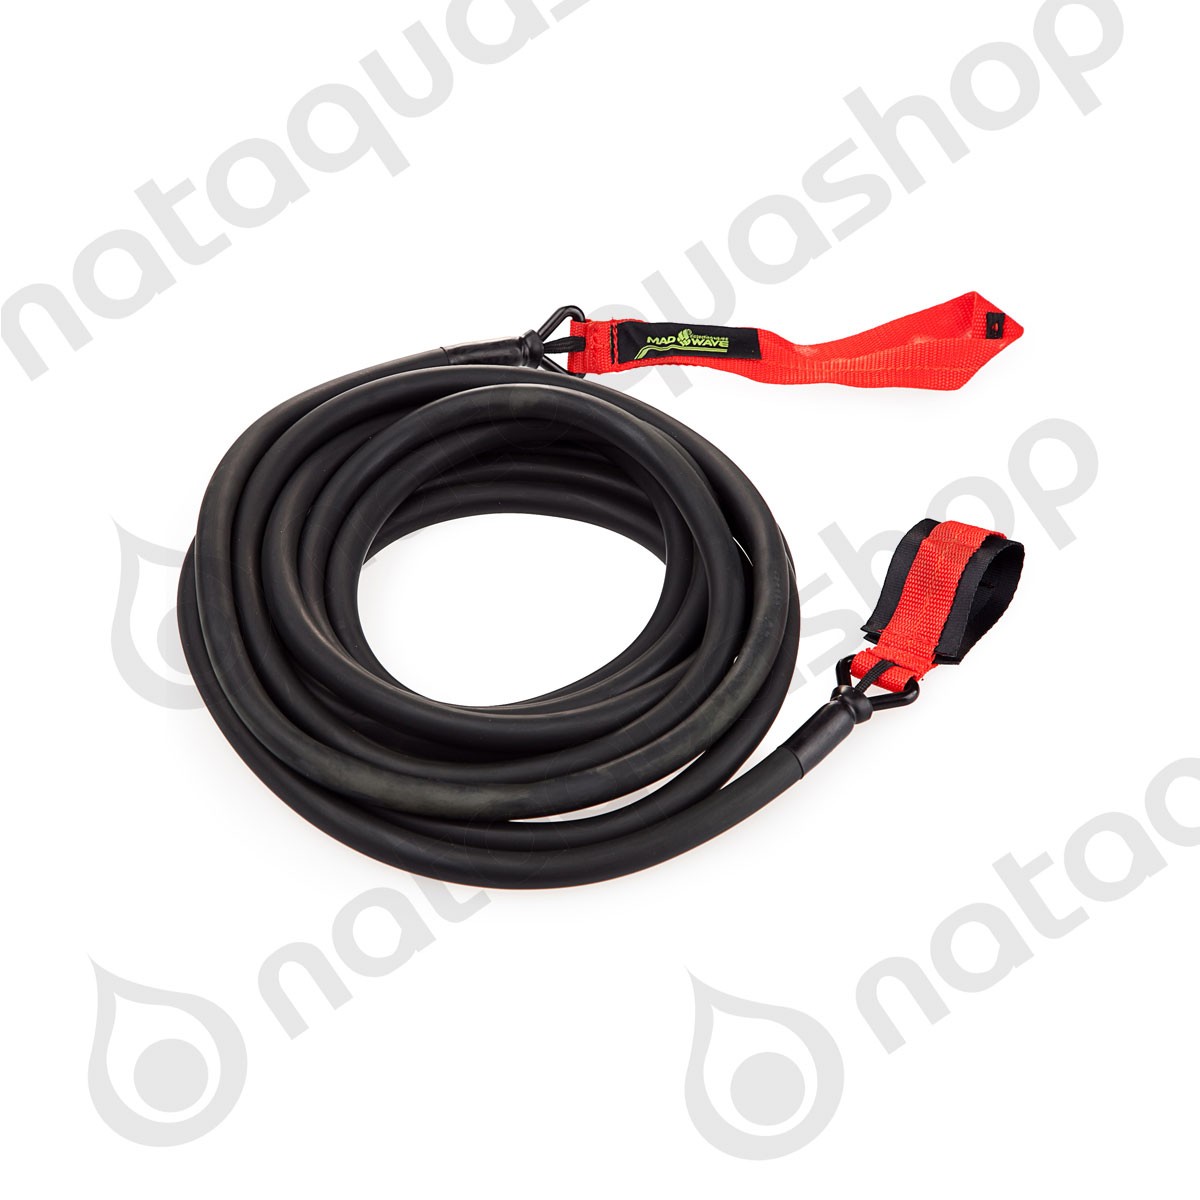 LONG SAFETY CORD couleurs